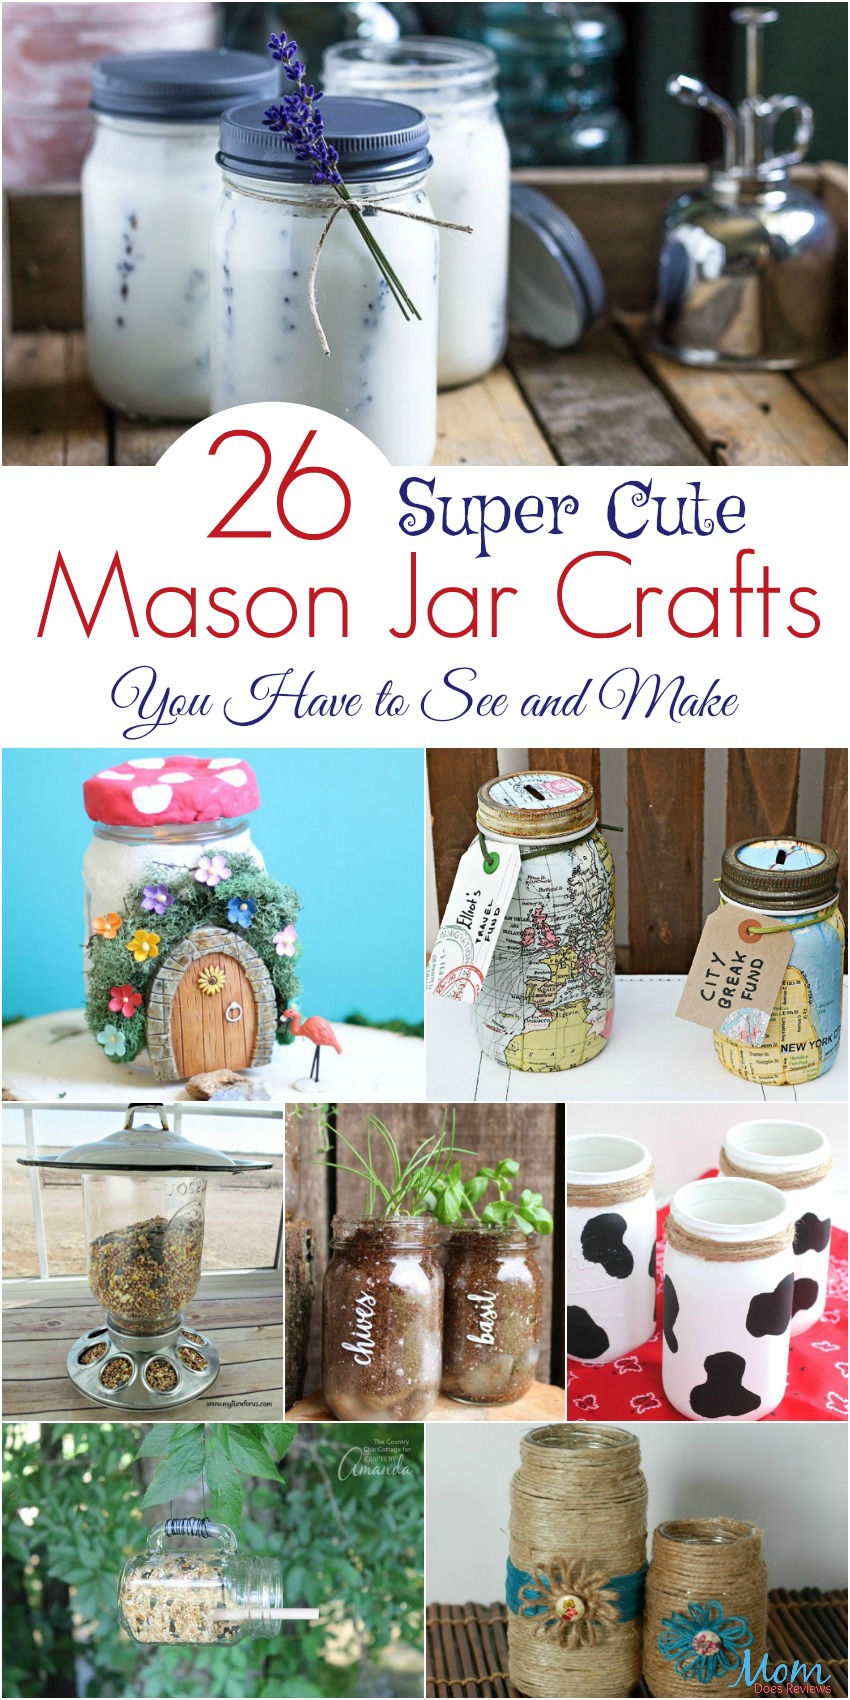 26 Super Cute Mason Jar Crafts You Have to See and Make